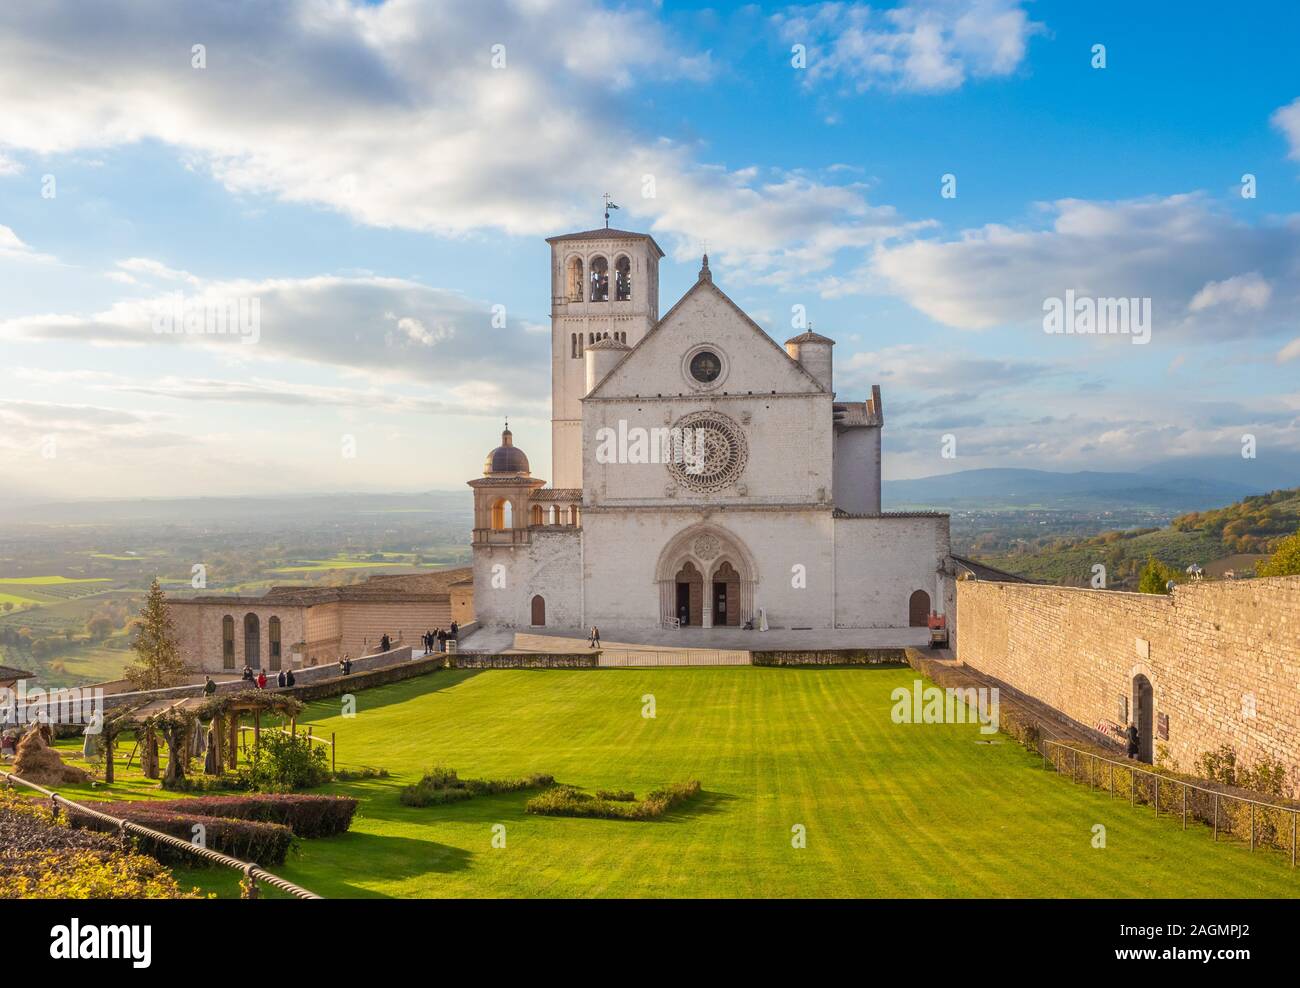 Assisi, Umbria (Italy) - The awesome medieval stone town in Umbria region, with the famous Saint Francis sanctuary, during Christmas holidays. Stock Photo